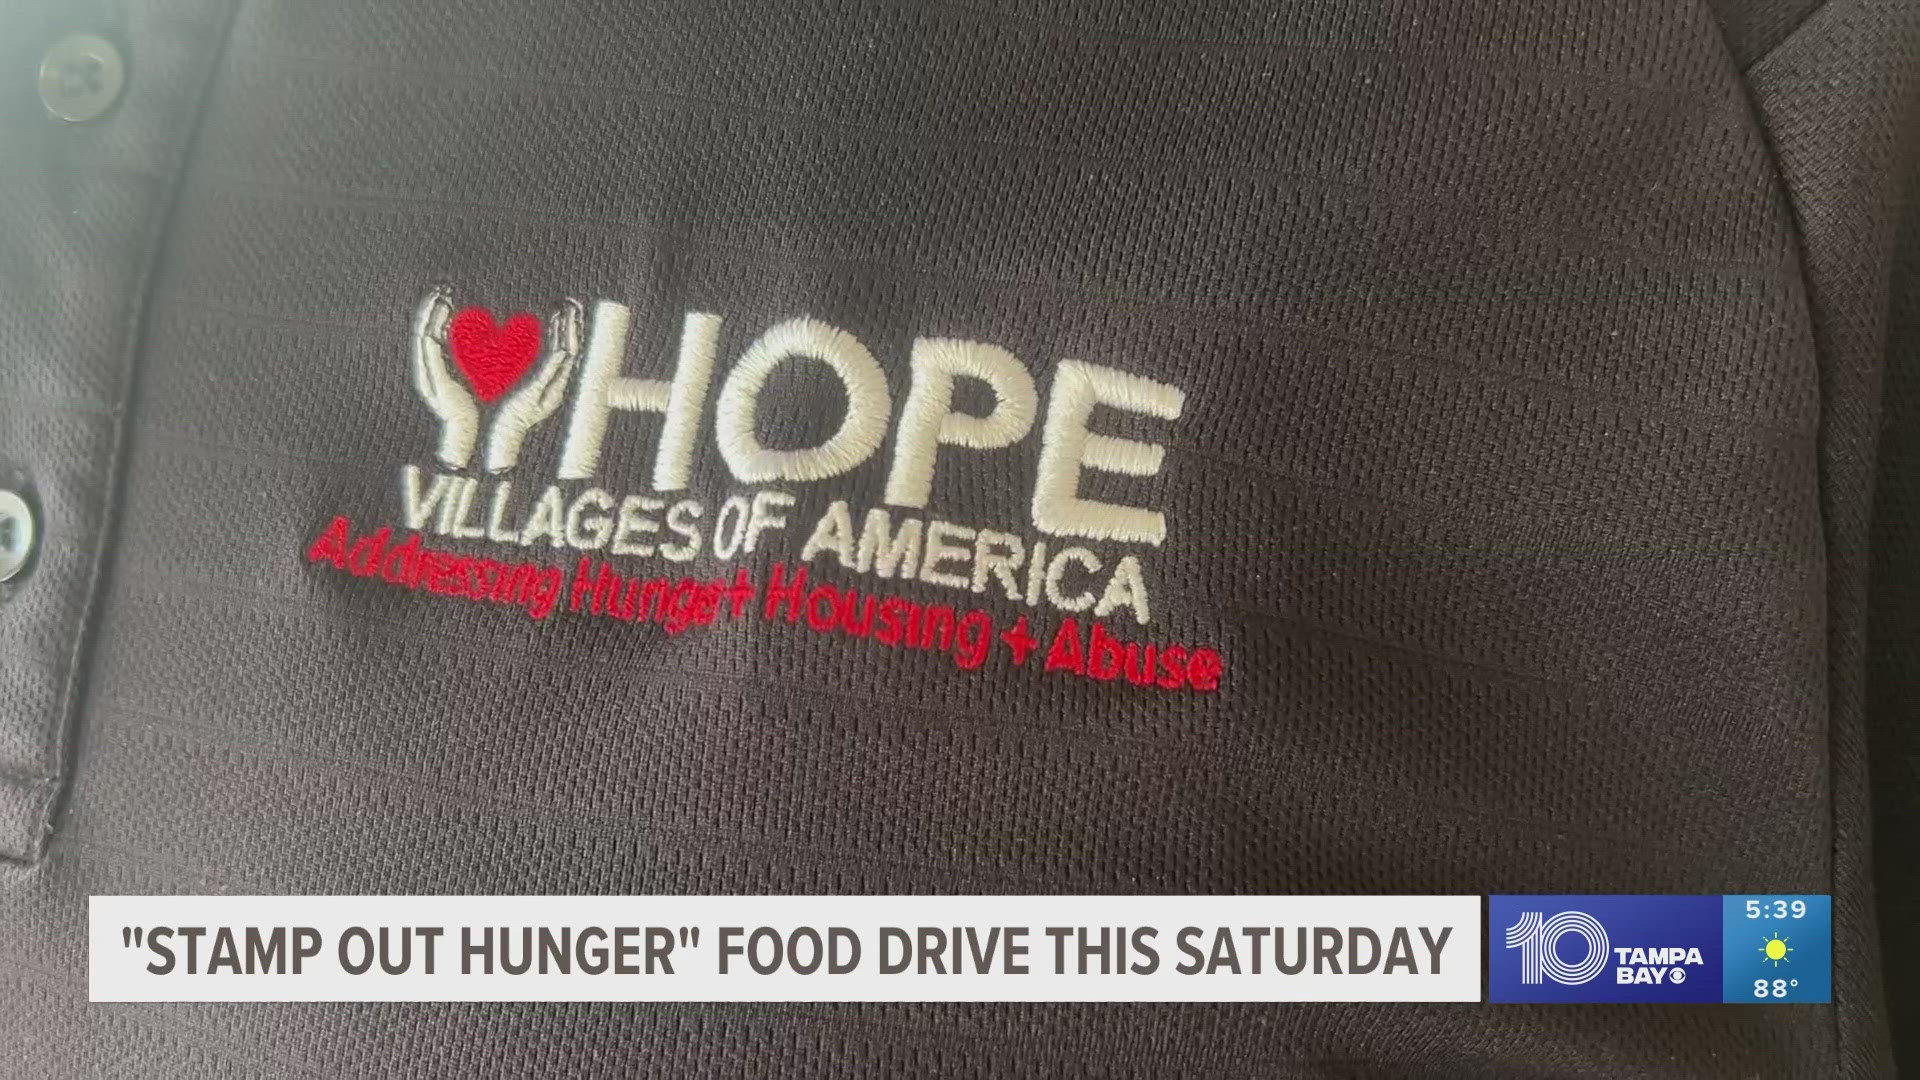 The Hope Villages of America food bank is gearing up for some big donations for “America’s largest food drive.”